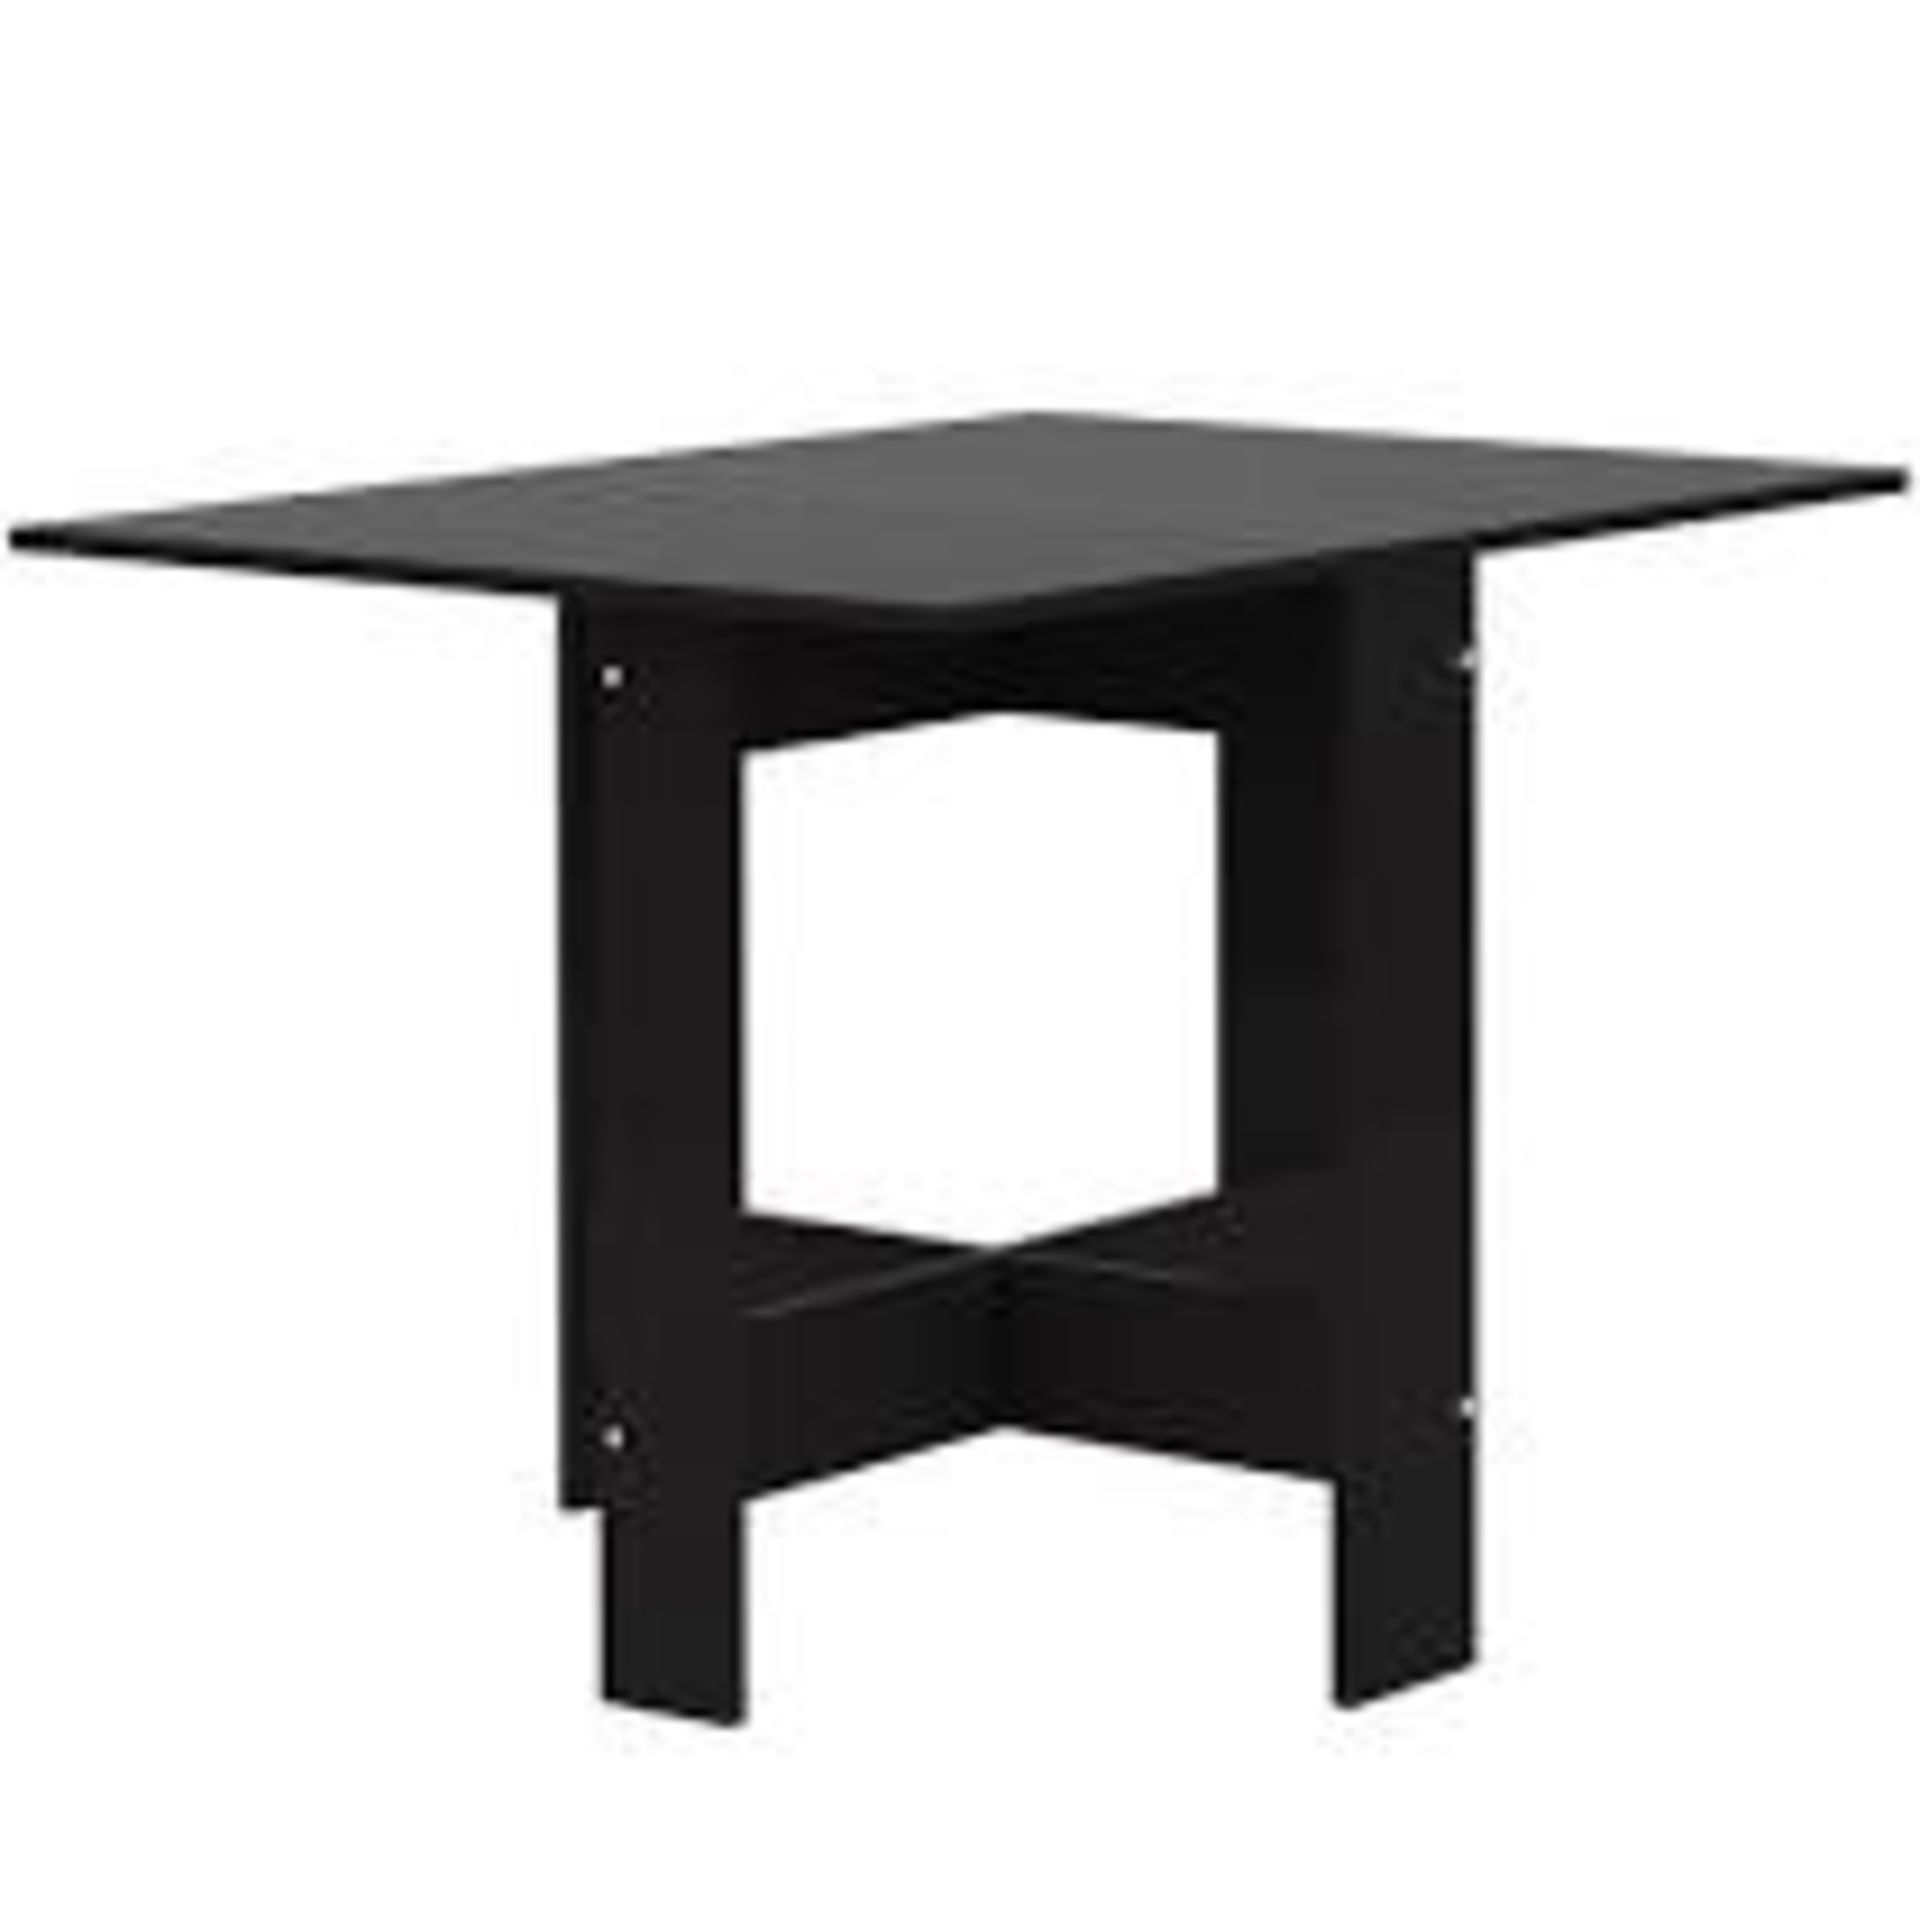 Massive Table Base In Black Gloss RRP £90 (18030) (Pictures Are For Illustration Purposes Only) (